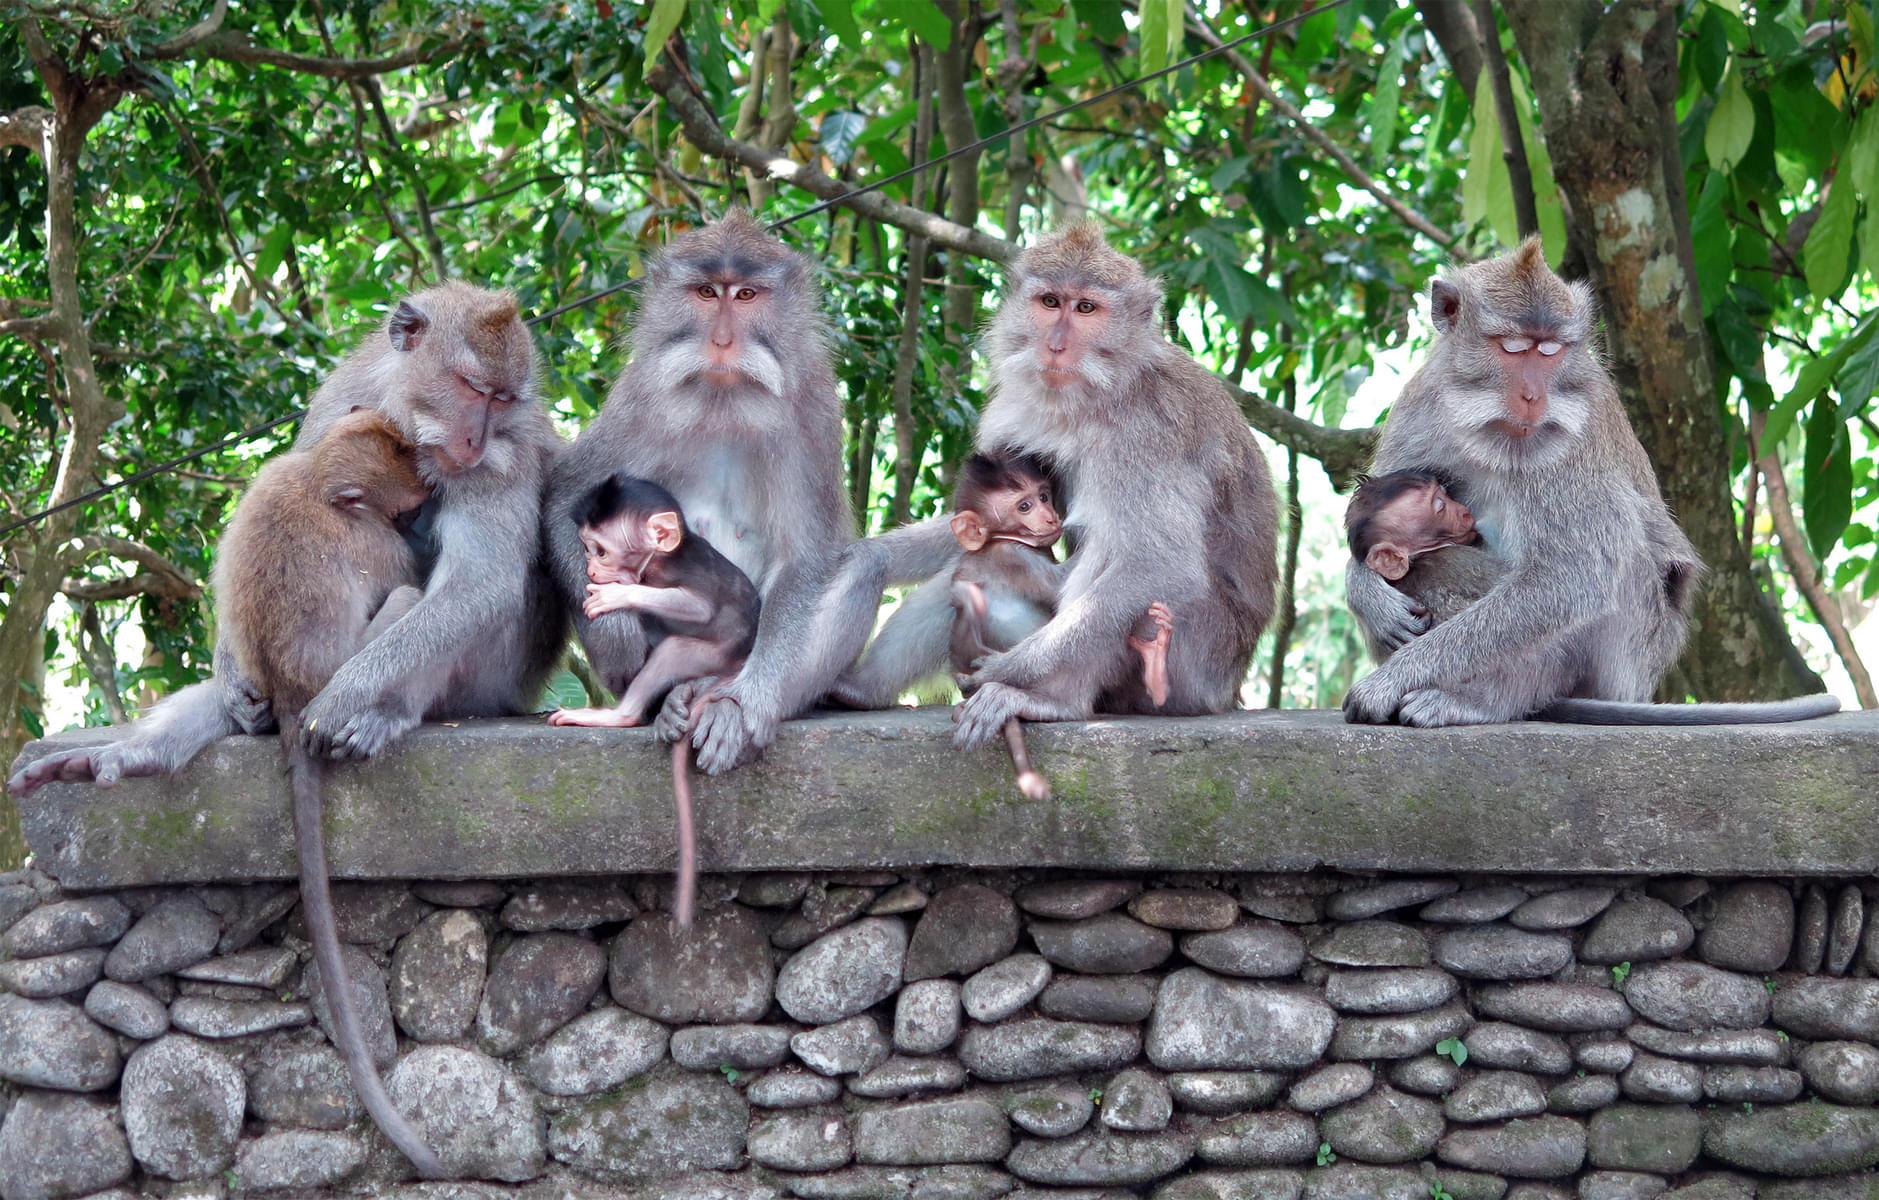 See a lot of monkeys here